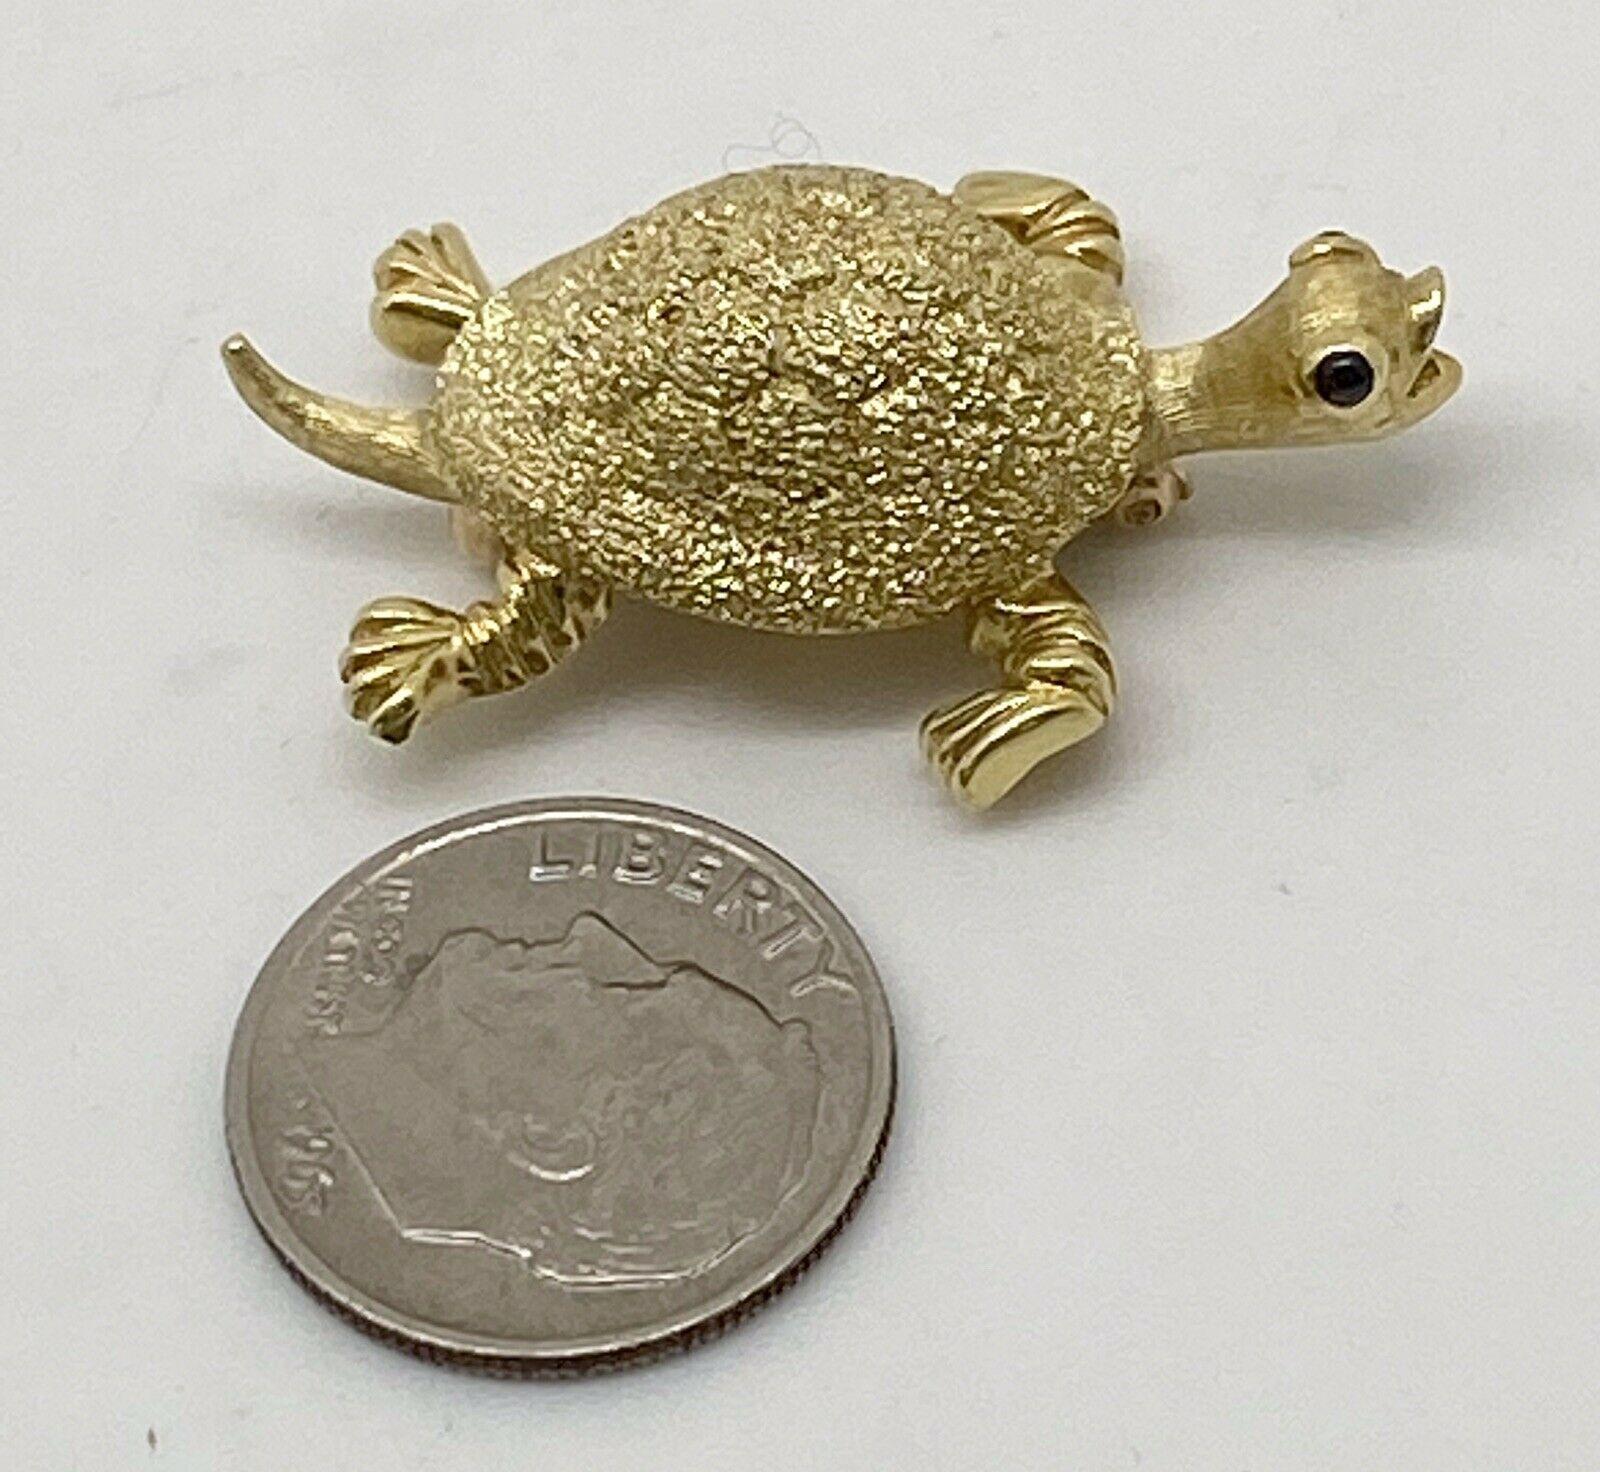 Tiffany & Co. Vintage 18k Yellow Gold & Cabochon Sapphire Turtle Brooch / Pin

Here is your chance to purchase a beautiful and highly collectible vintage turtle brooch.  Truly a great piece at a great price! 

Weight: 9.4 grams

Condition: Great